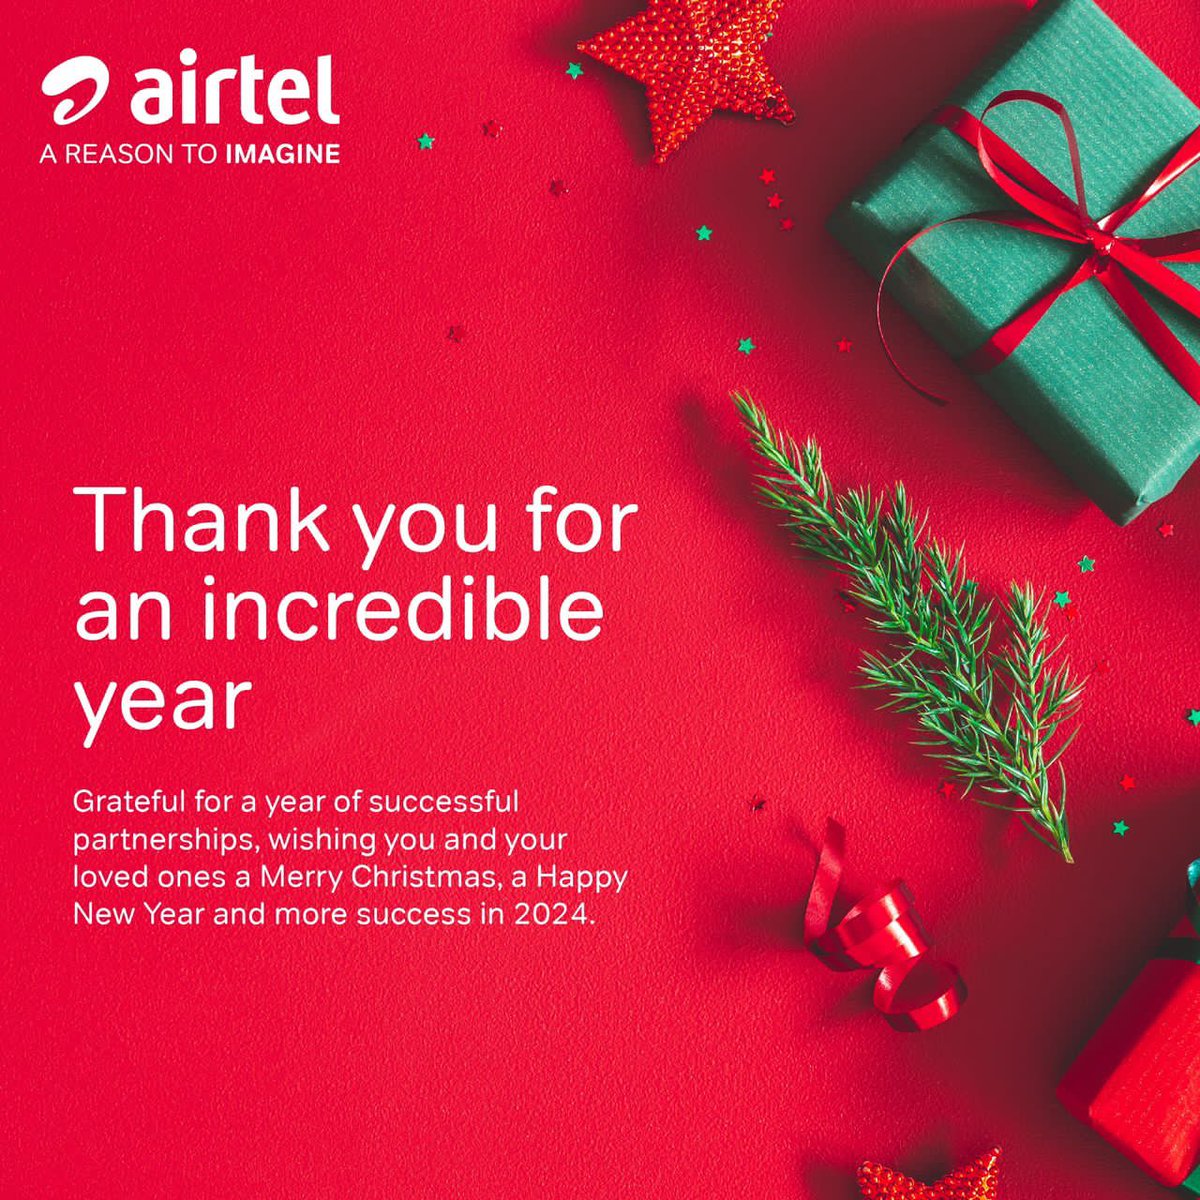 It's the most beautiful time of the year and @Airtel_Ug wishes a Merry Xtmas to all the airtel users and a blessed new year #AReasonToImagine